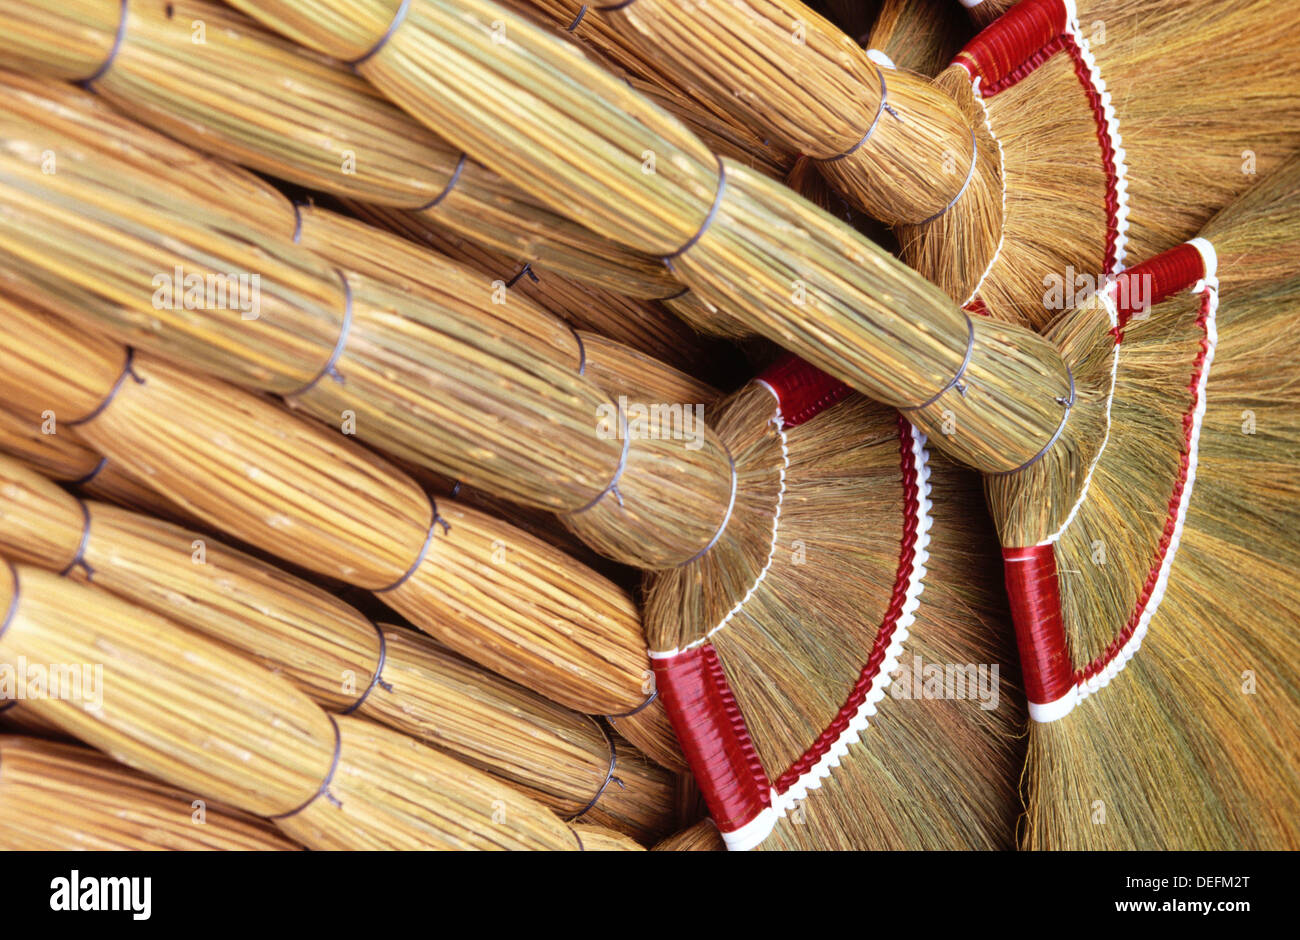 Philippine Broom High Resolution Stock Photography and Images - Alamy